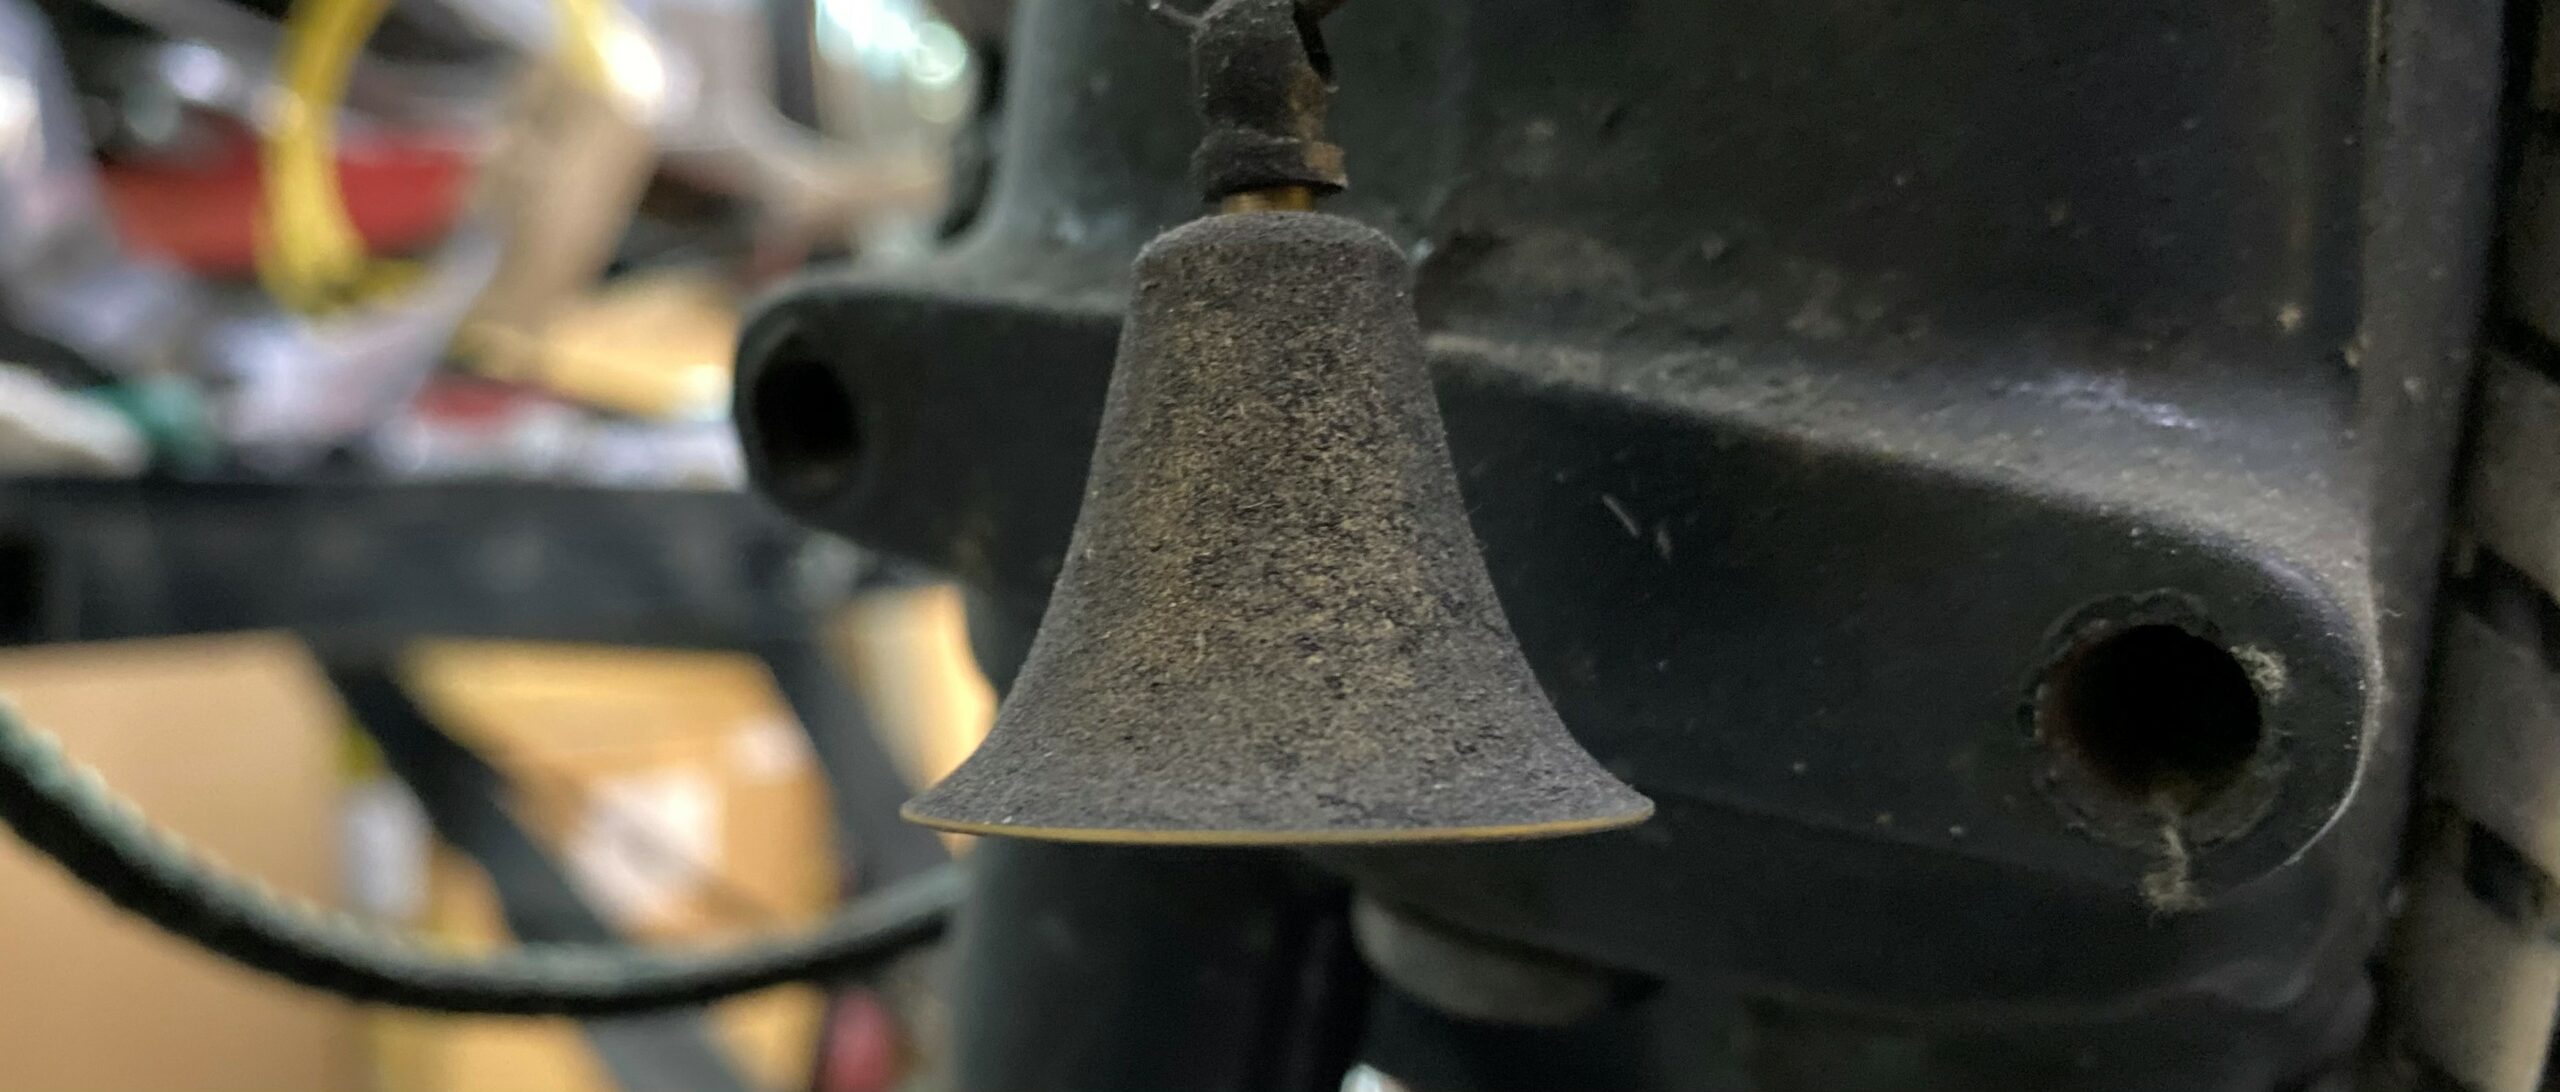 The story behind the Gremlin bell